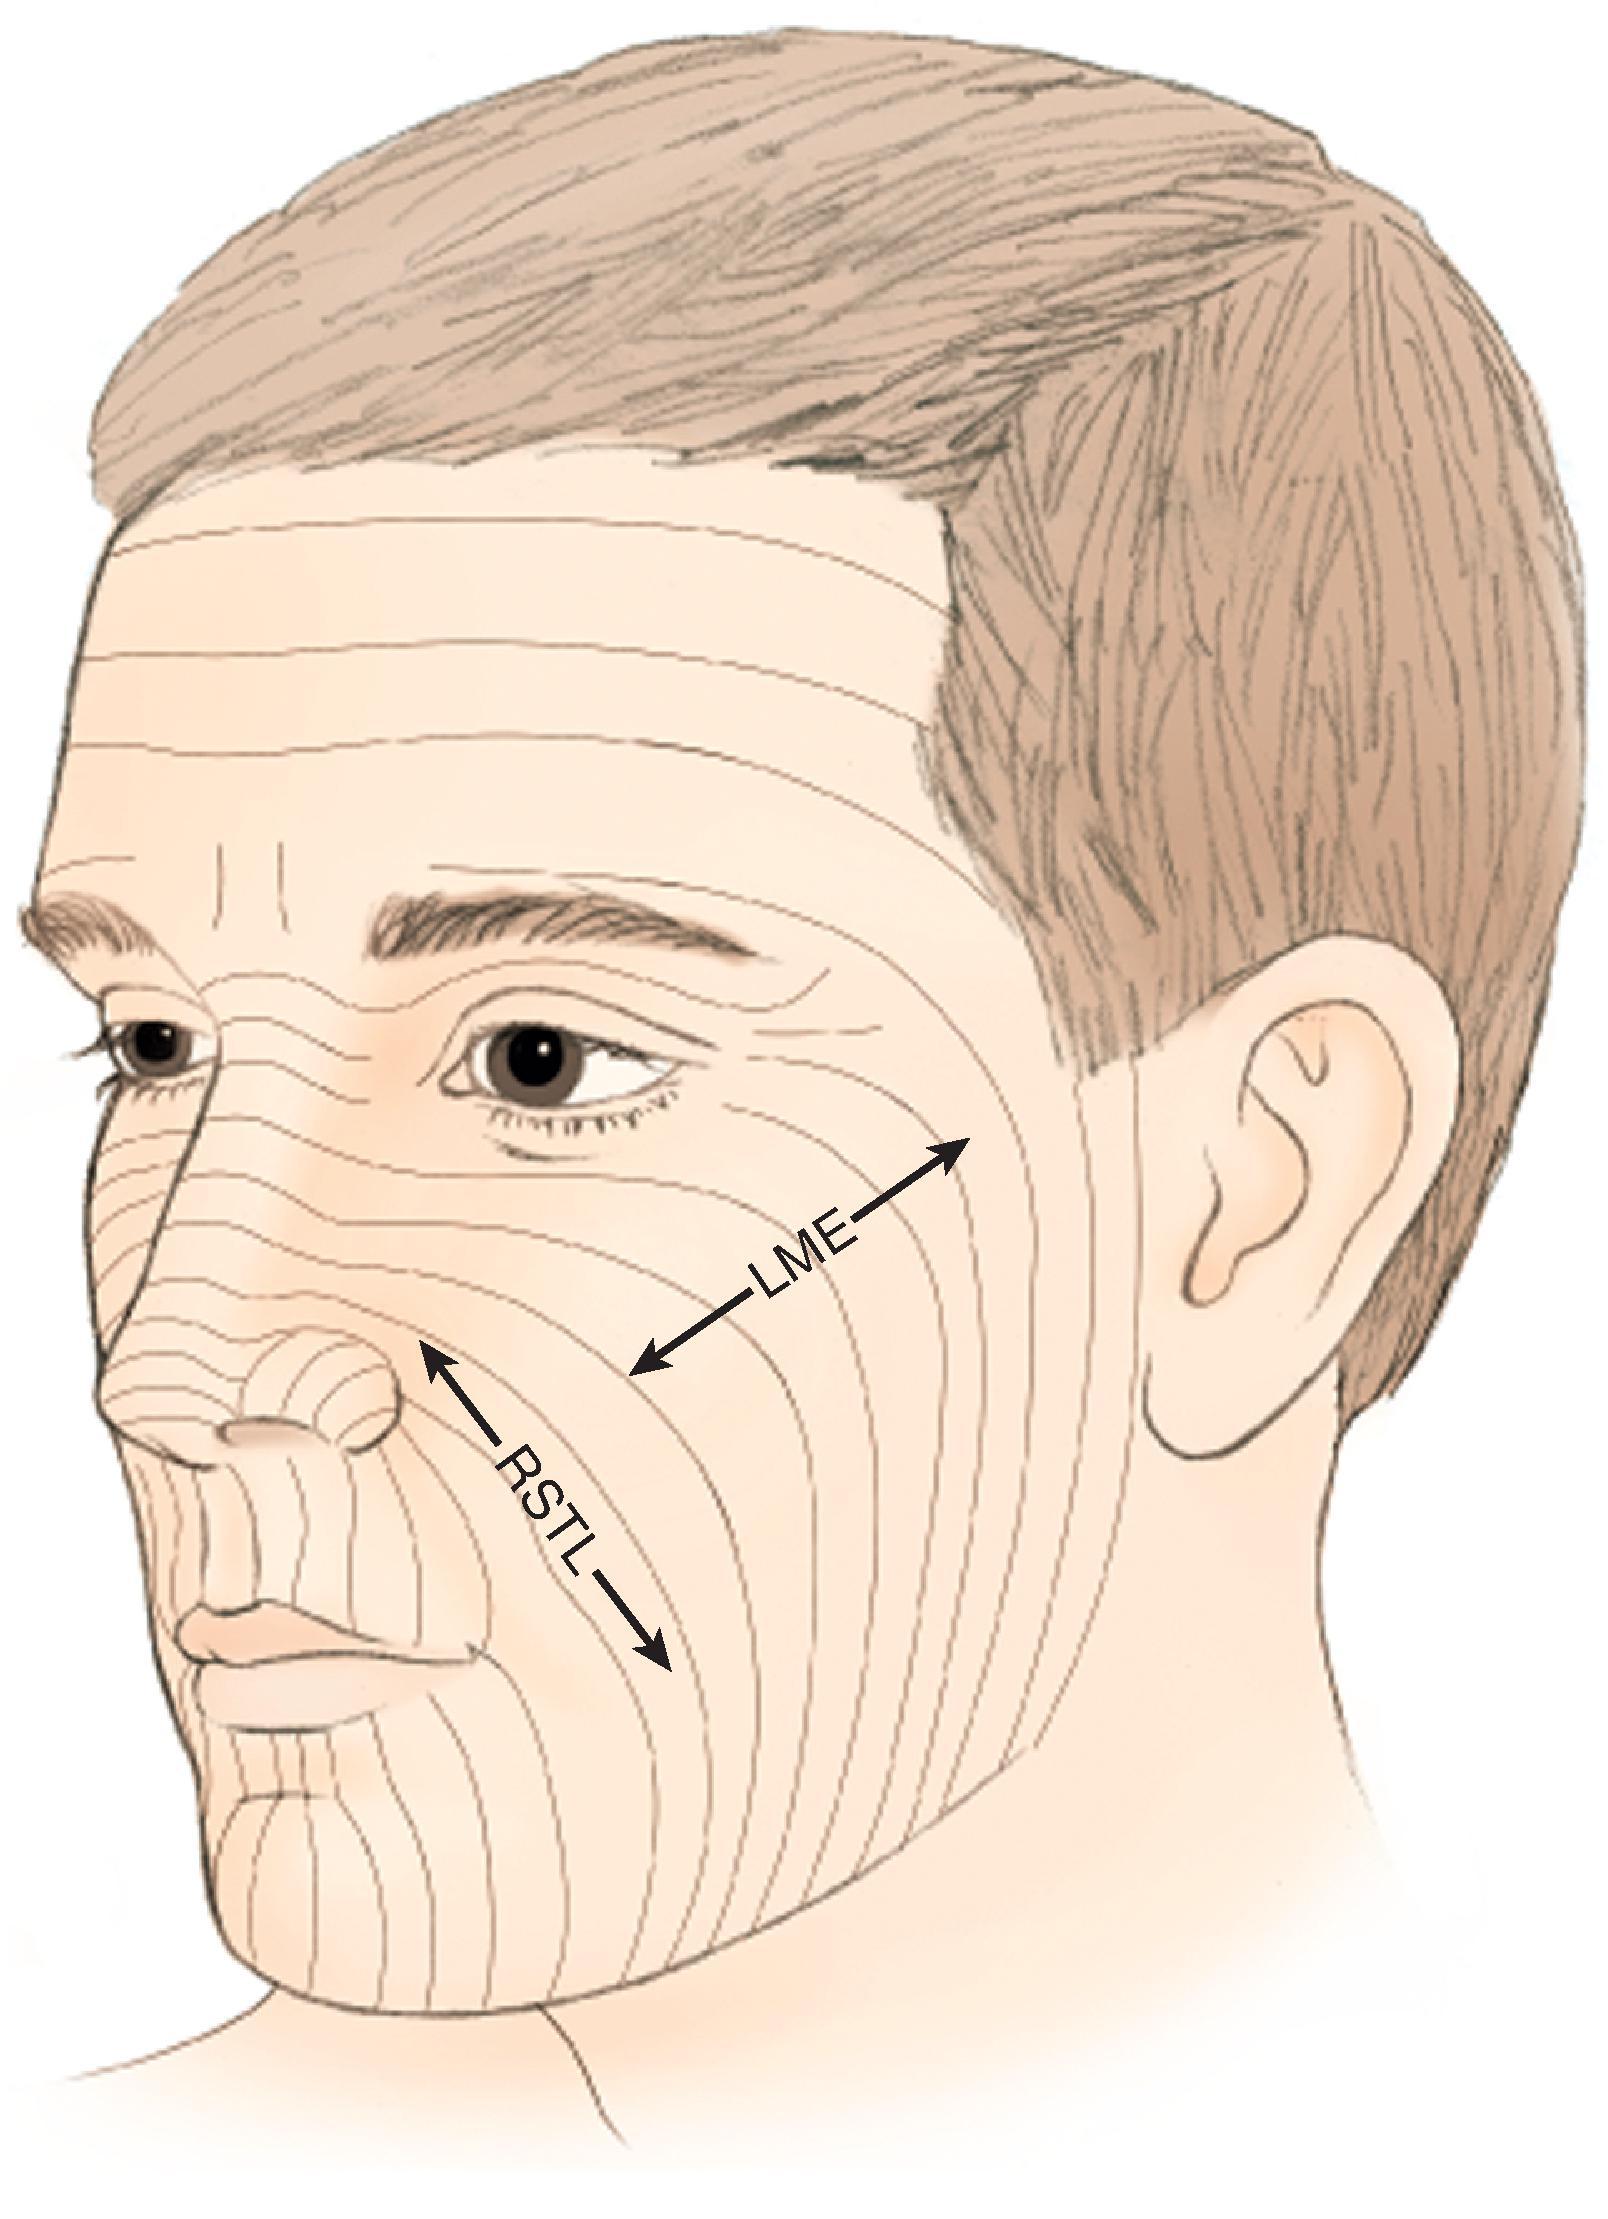 FIG. 20.2, Configuration of relaxed skin tension lines (RSTLs), which are perpendicular to lines of maximal extensibility (LME). Elliptical excisions parallel to RSTLs result in less wound closure tension because skin recruitment is in axis of LME.